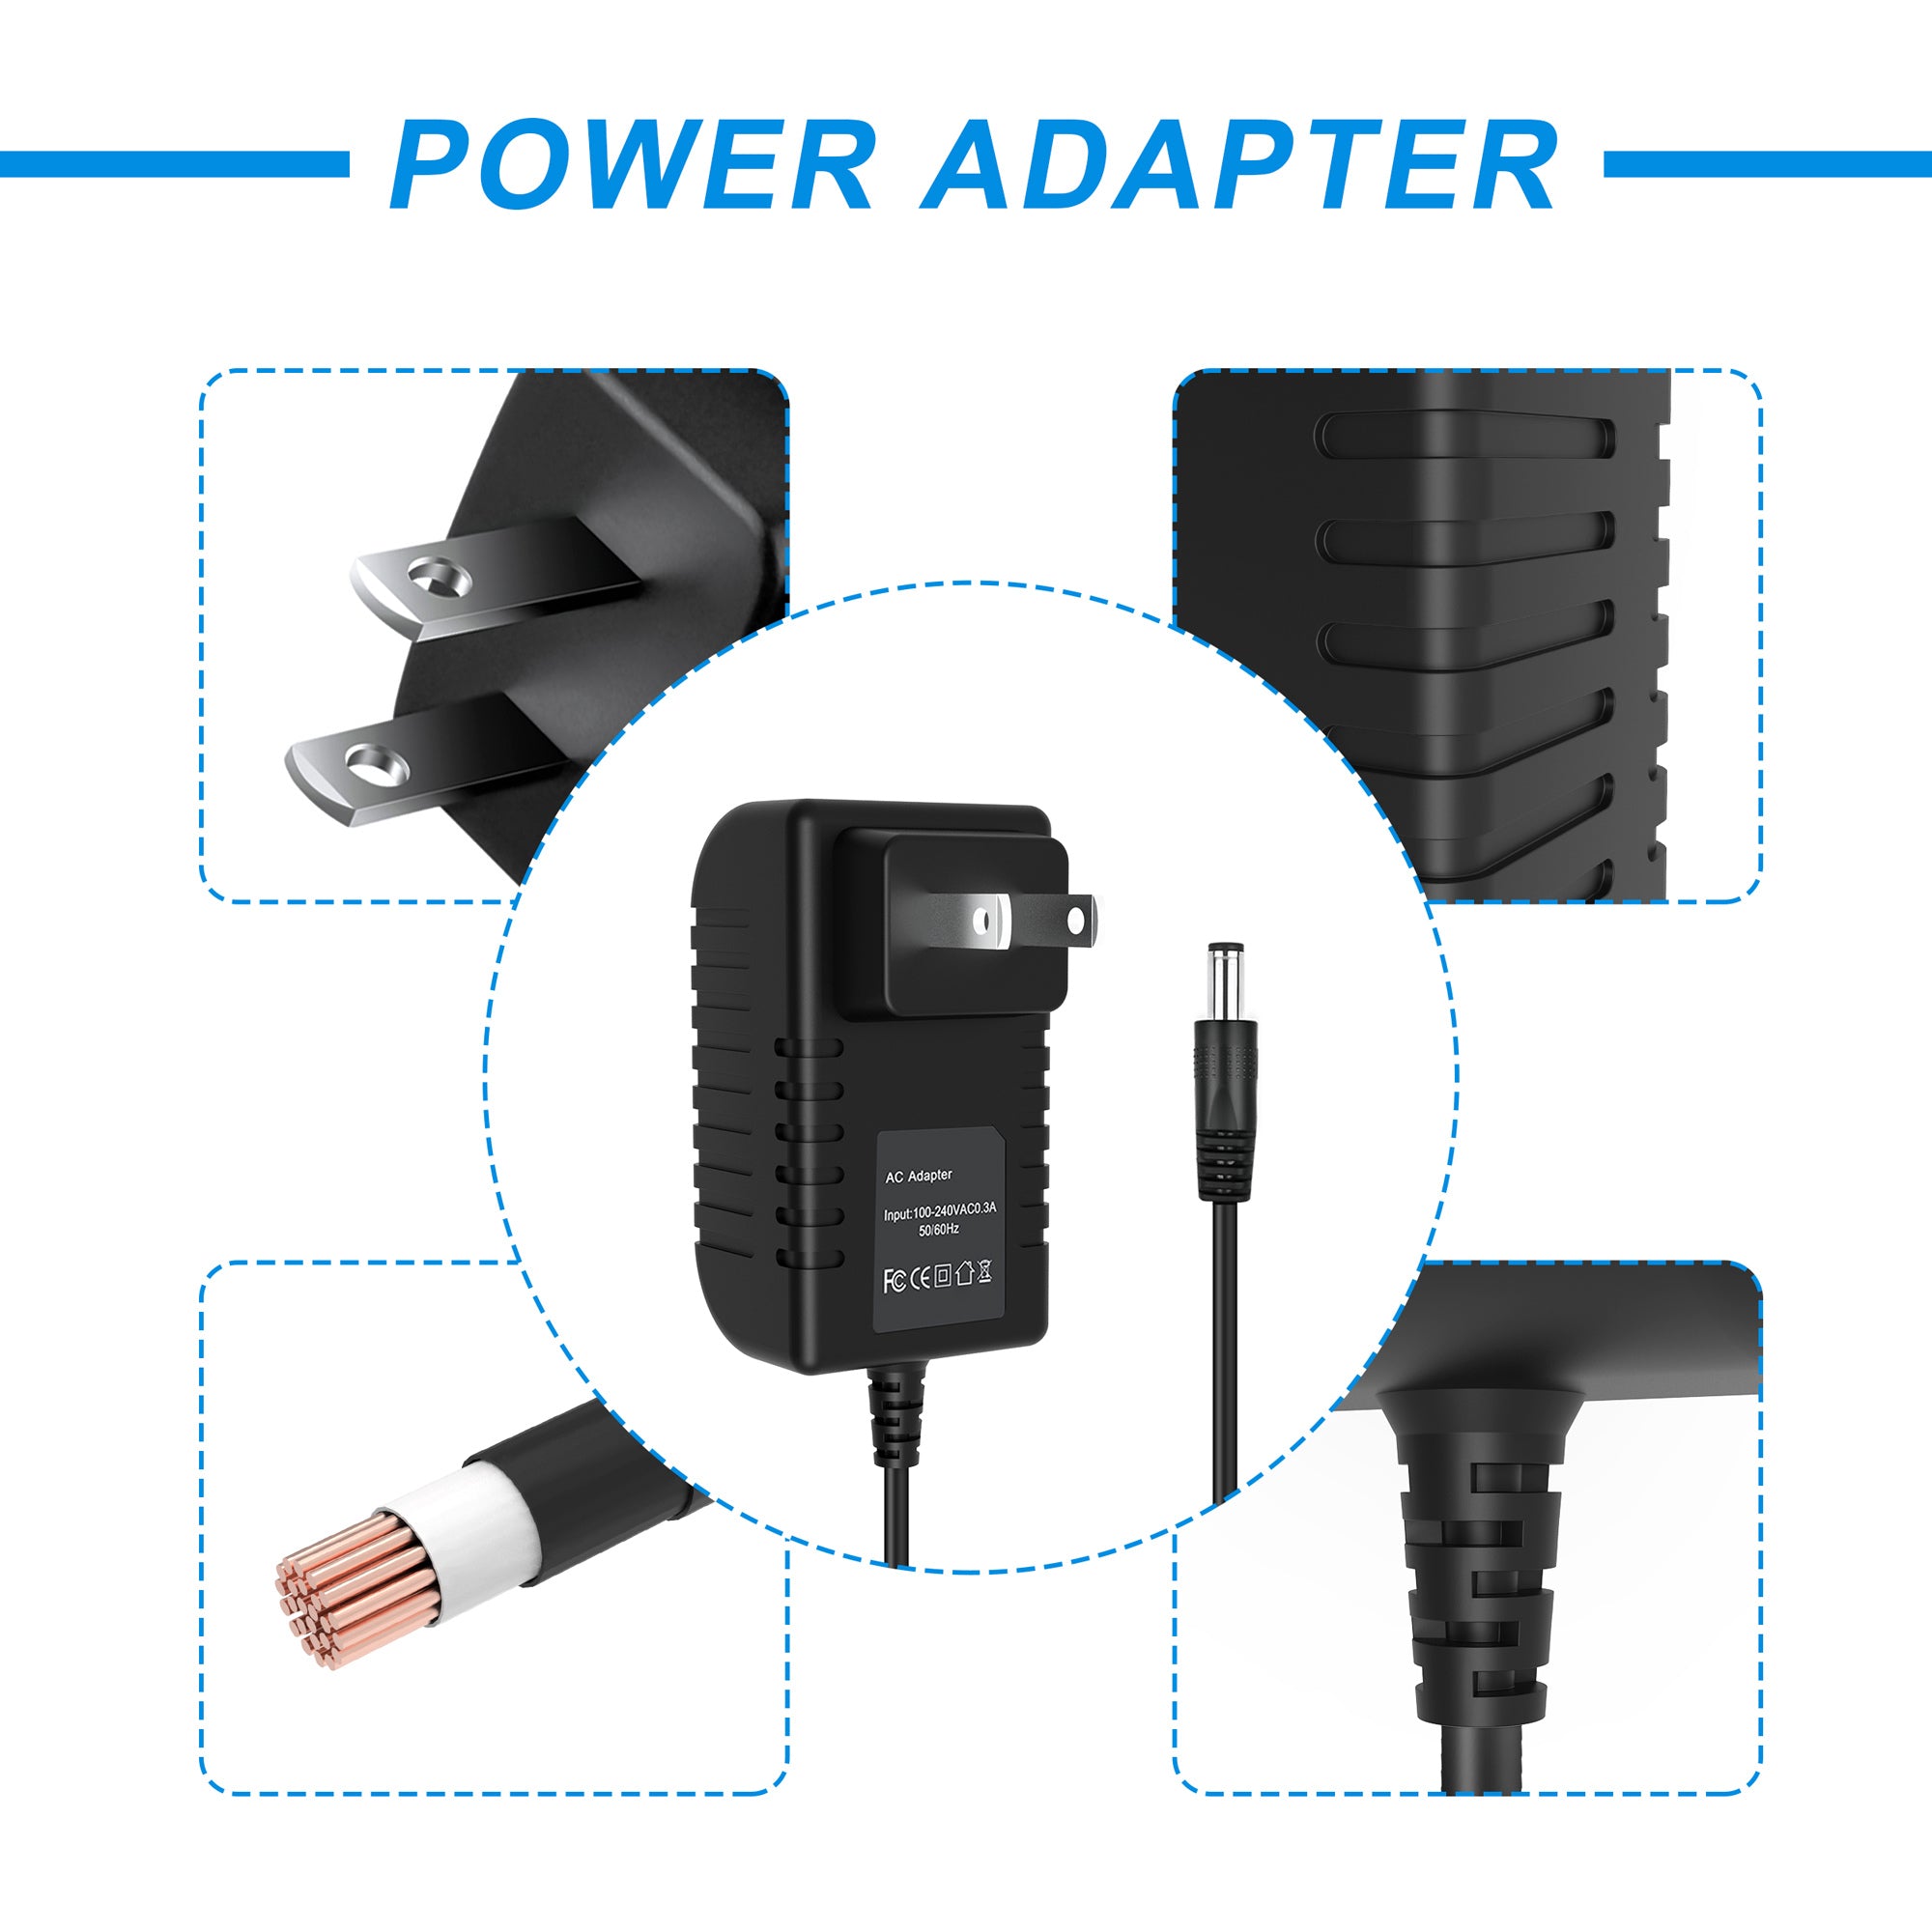 AbleGrid AC/DC Adapter Compatible with Scian LD582 LD586 Digital Blood Pressure Monitor Power Supply Cord Cable PS Wall Charger Input: 100V - 120V AC - 240 VAC 50/60Hz Worldwide Voltage Use Mains PSU